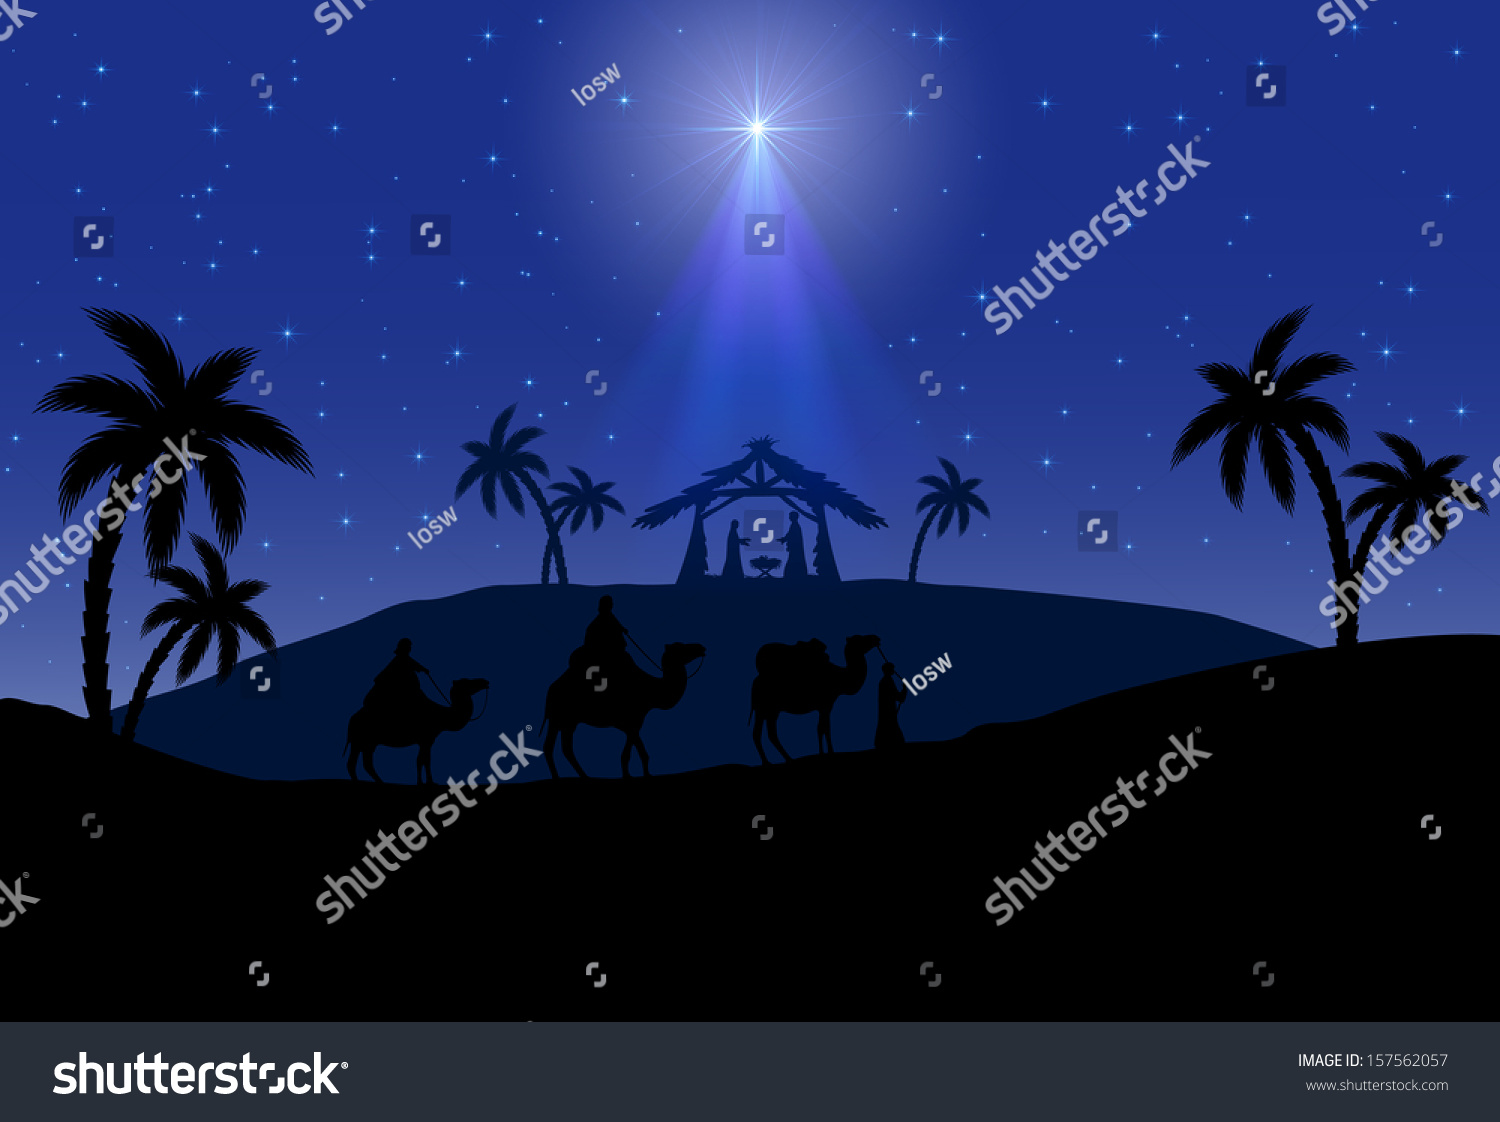 Christian Christmas Scene With The Three Wise Men And Shining Star ...